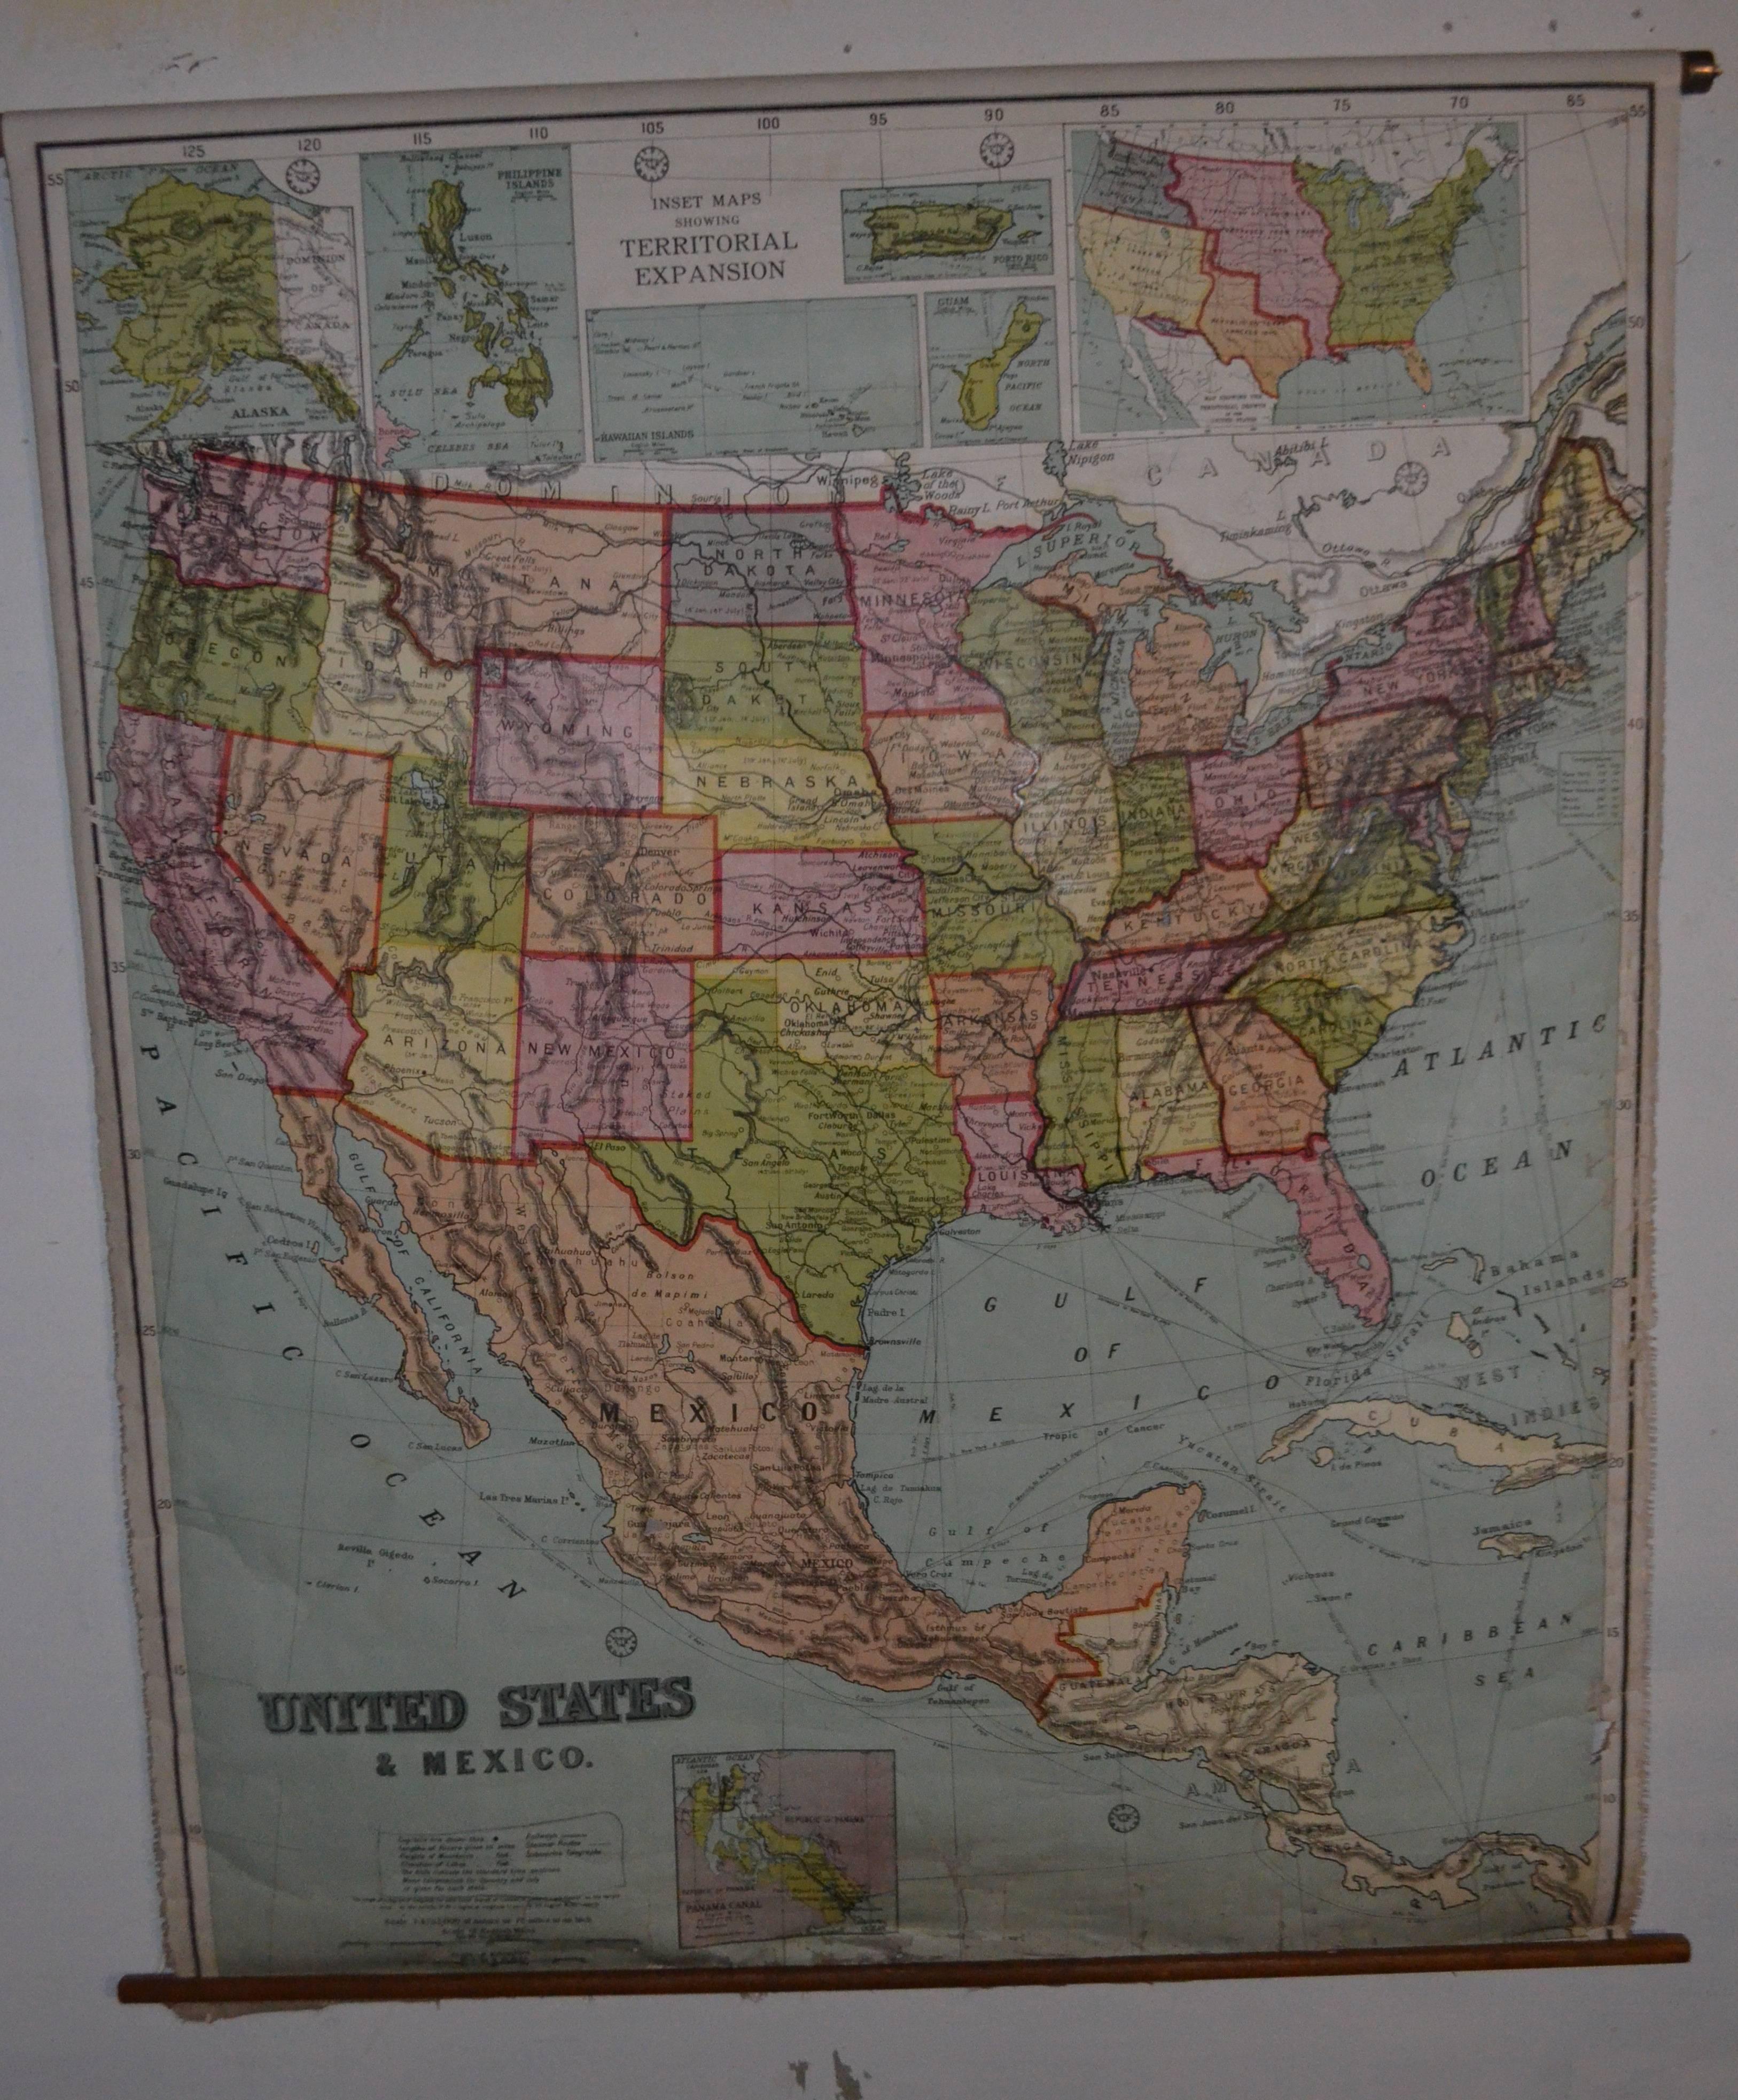 Early 20th century map of the United States and Mexico. This 1916 edition, on retractable wooden roller, was printed in Edinburgh, Scotland around the time the U.S. entered World War I after much debate and reluctance. Despite its 100-plus year age,